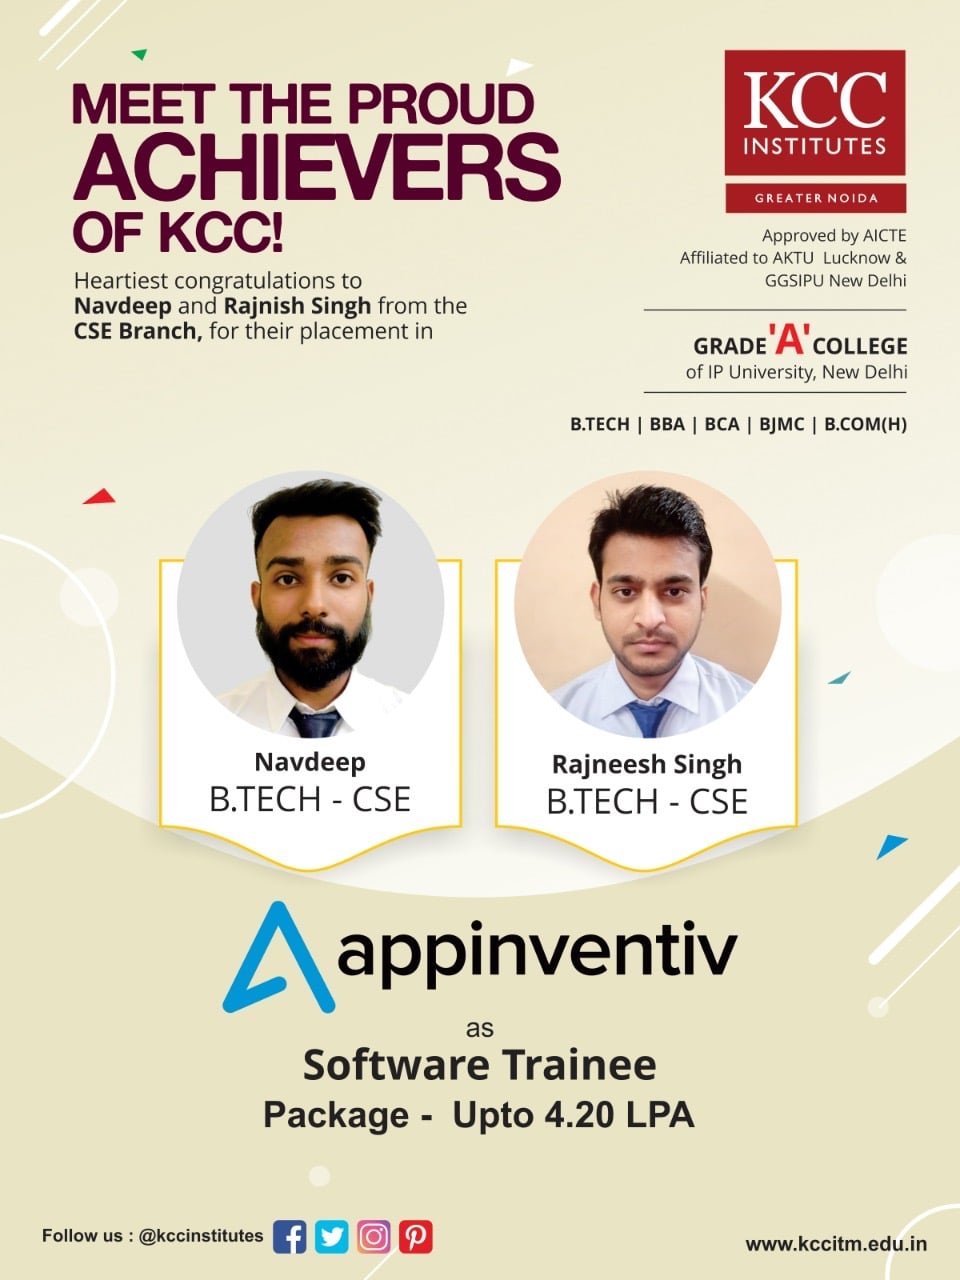  Congratulations Navdeep and Rajneesh Singh from B.Tech CSE Branch for getting placed in Appinventiv